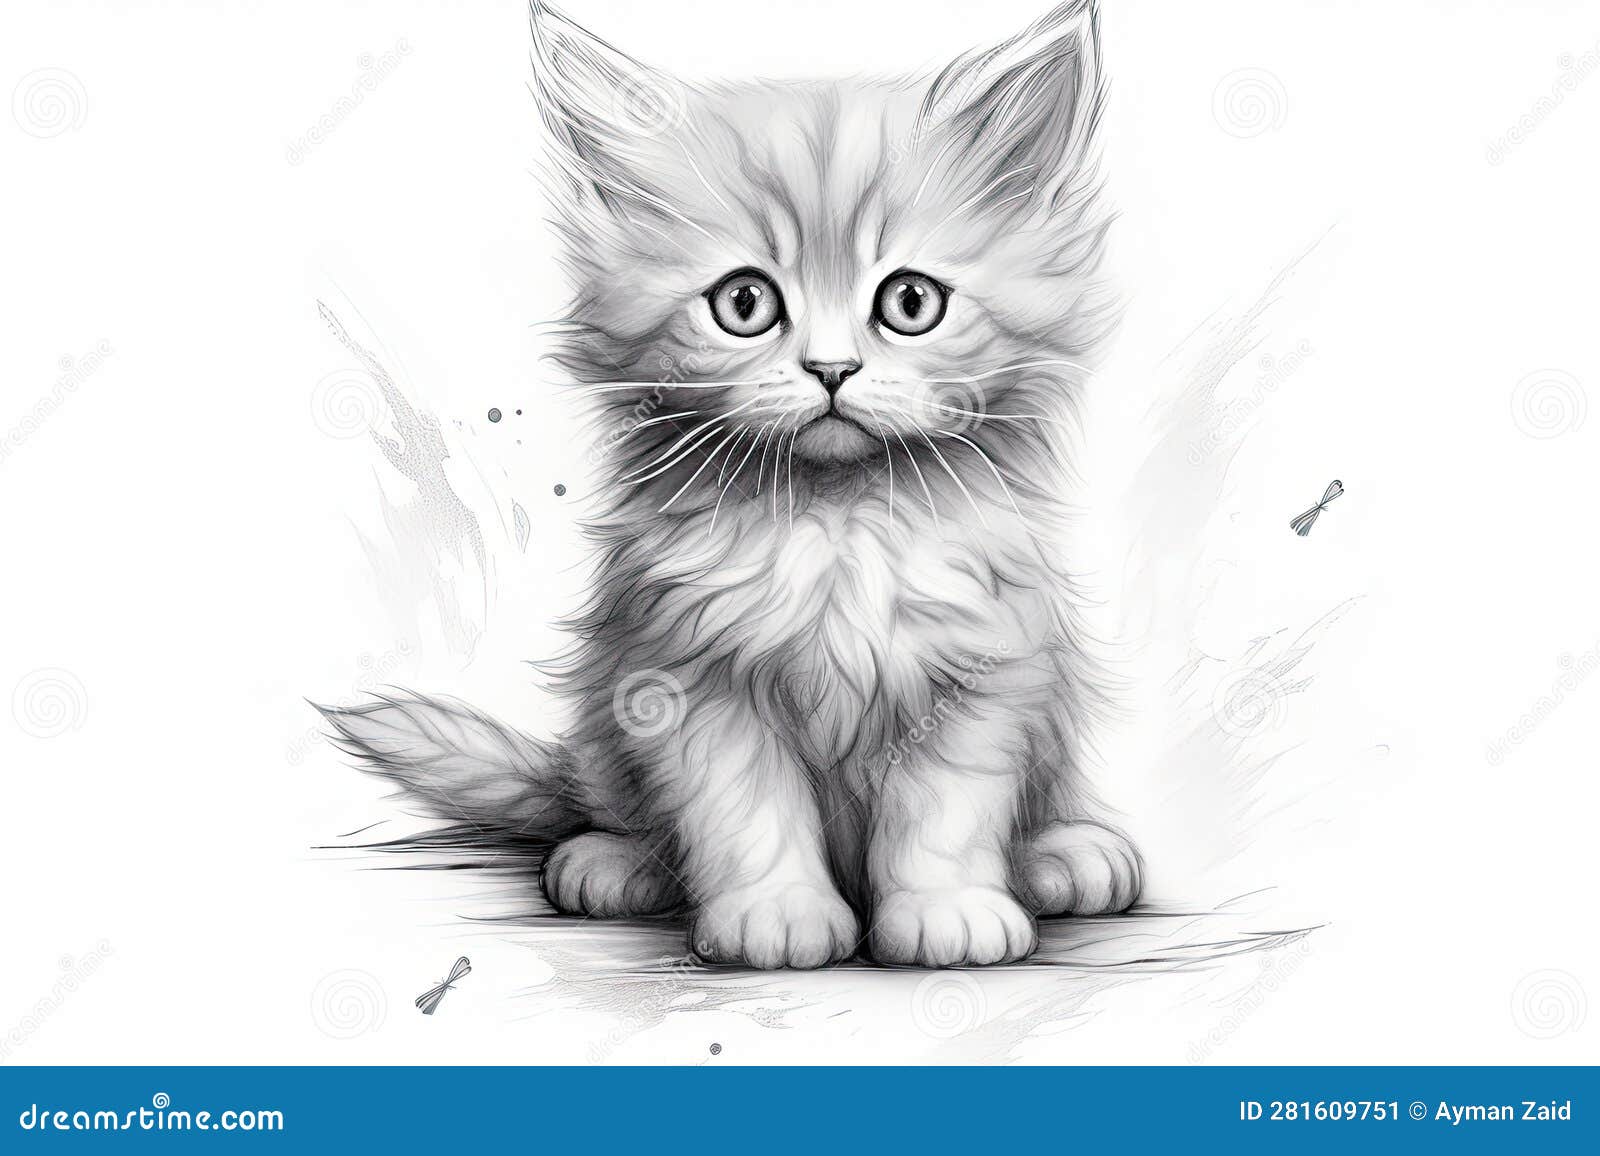 Cat Drawing by LethalChris on DeviantArt